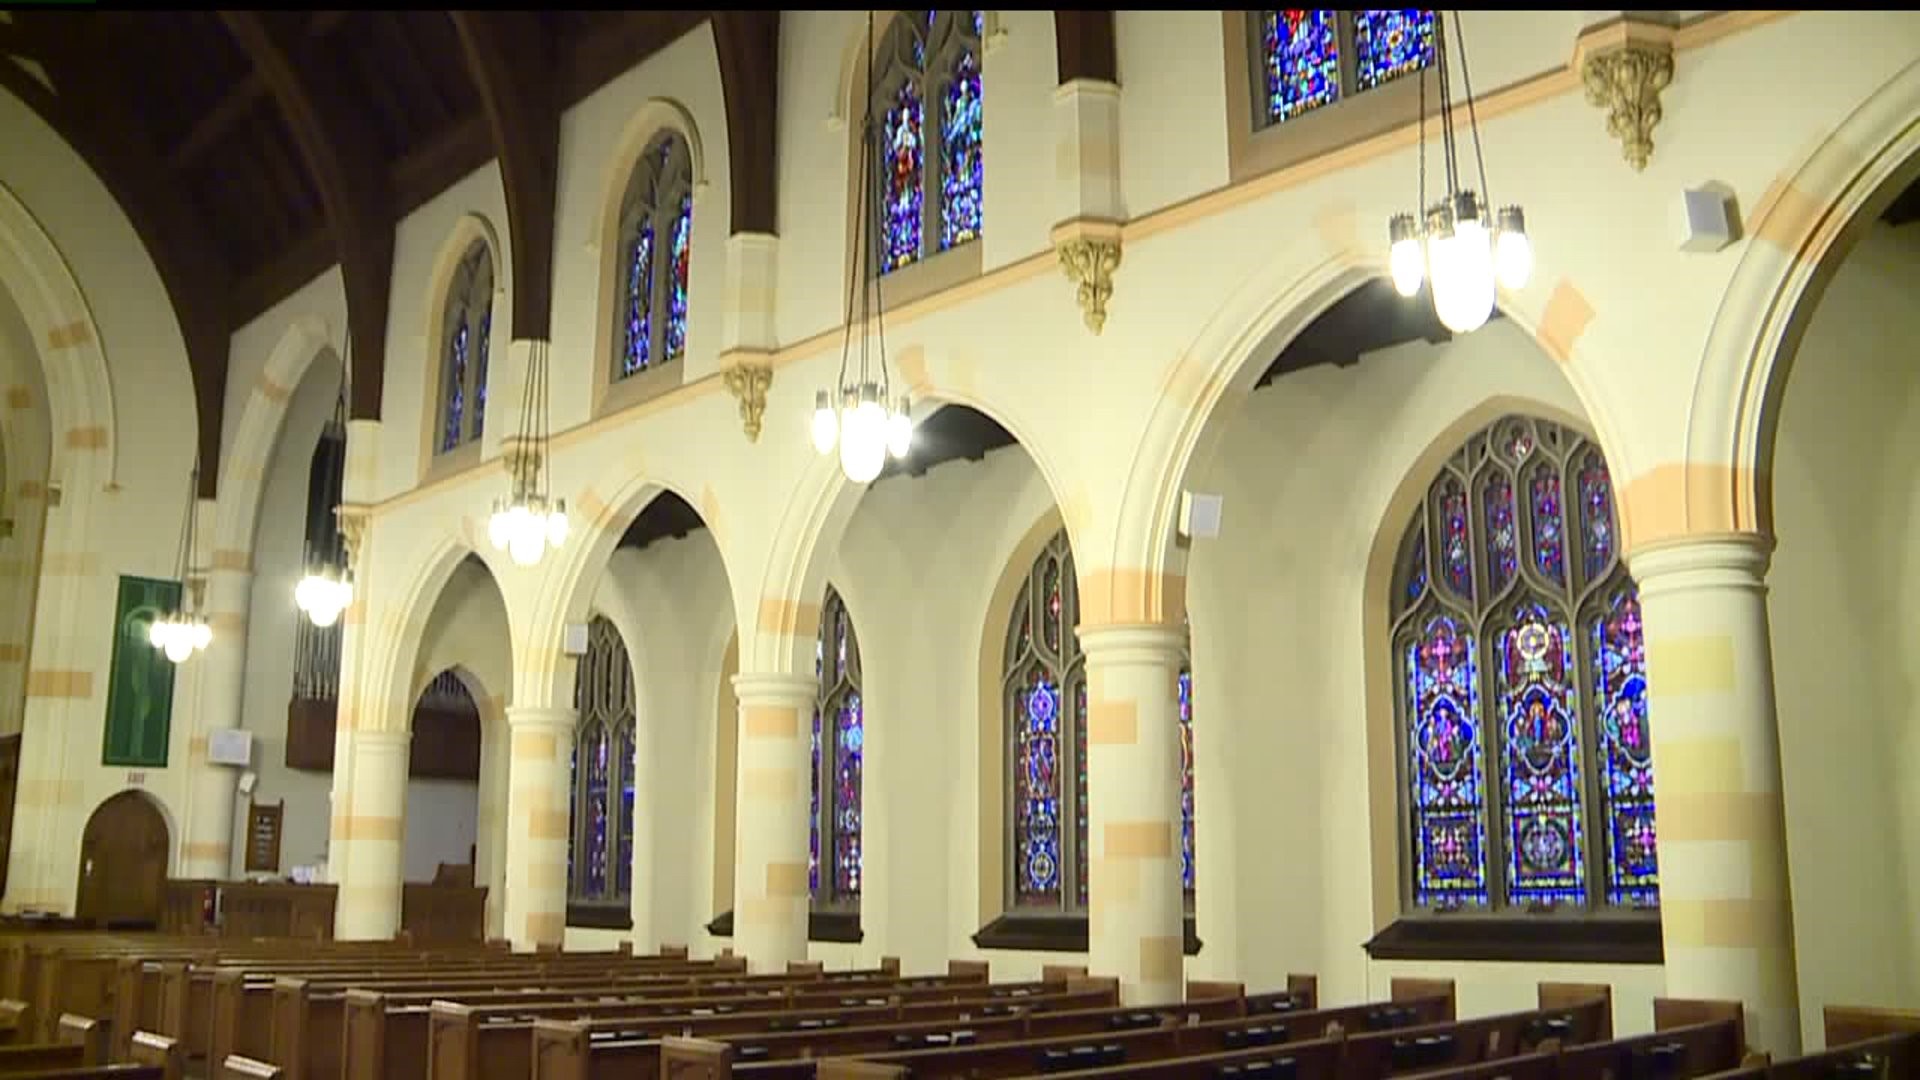 `A house of germs`: some churches take preventative steps to keep people flu-free